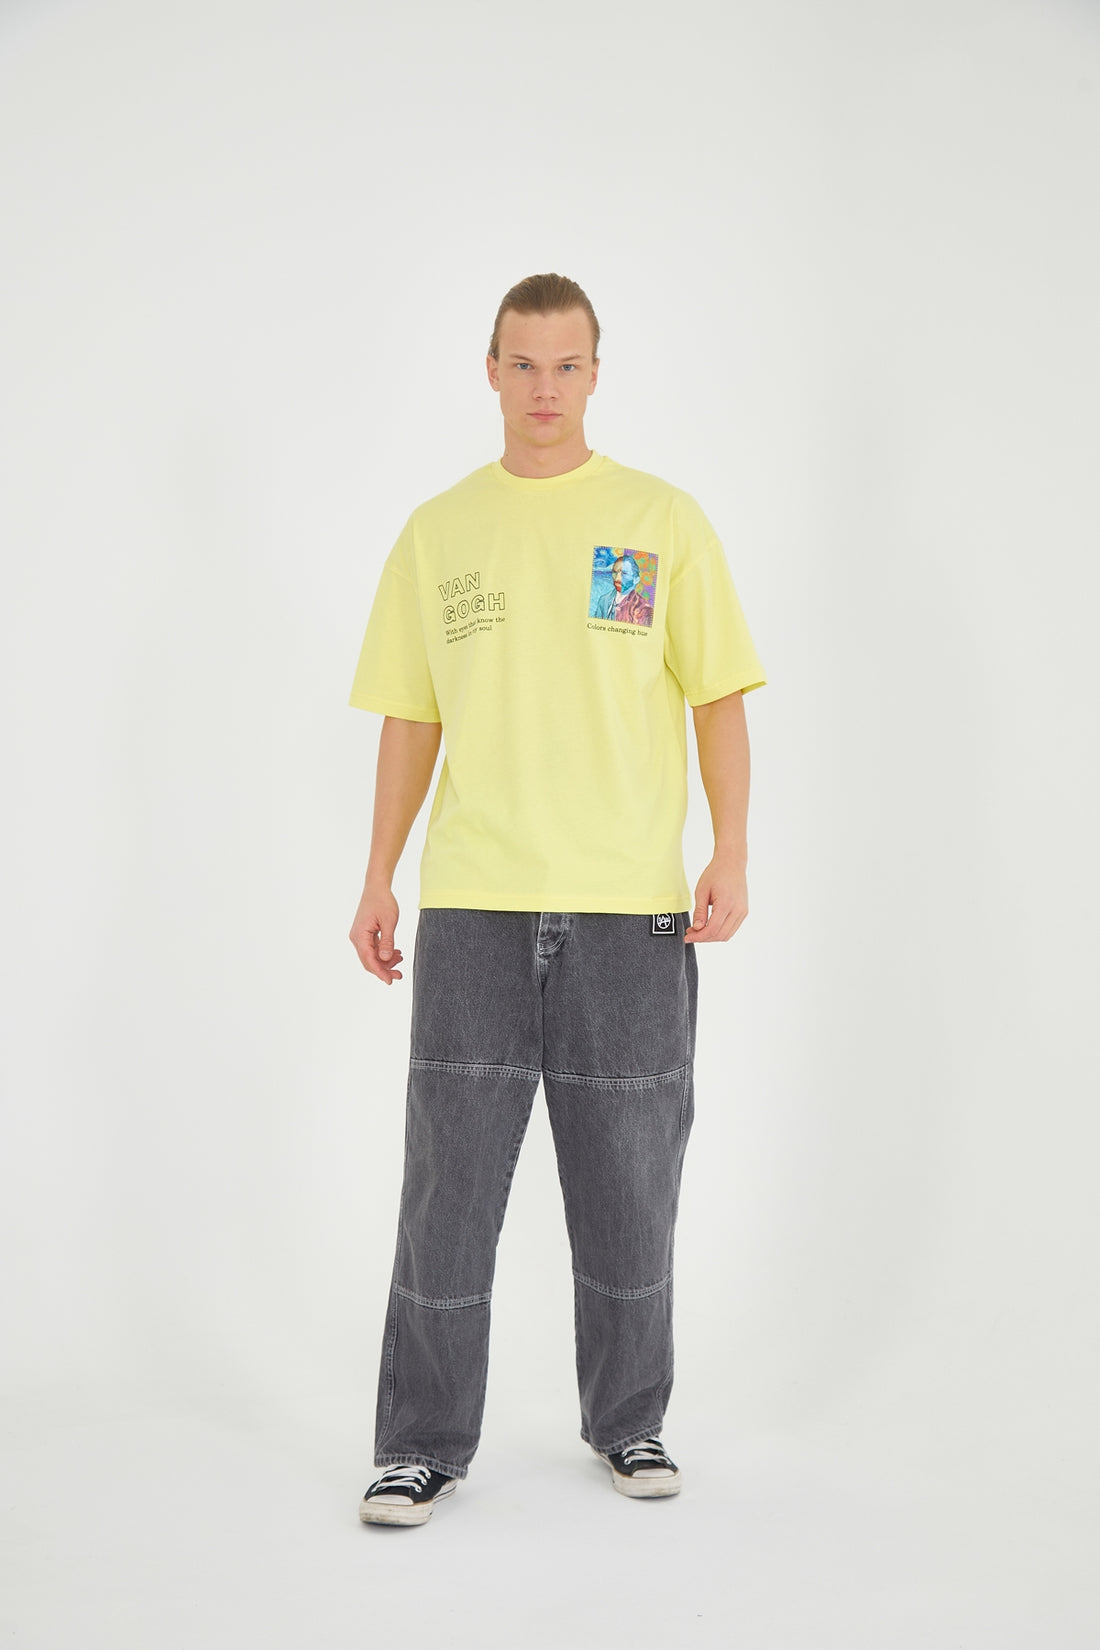 T-SHIRT - COLOR CHANGING HUE - YELLOW